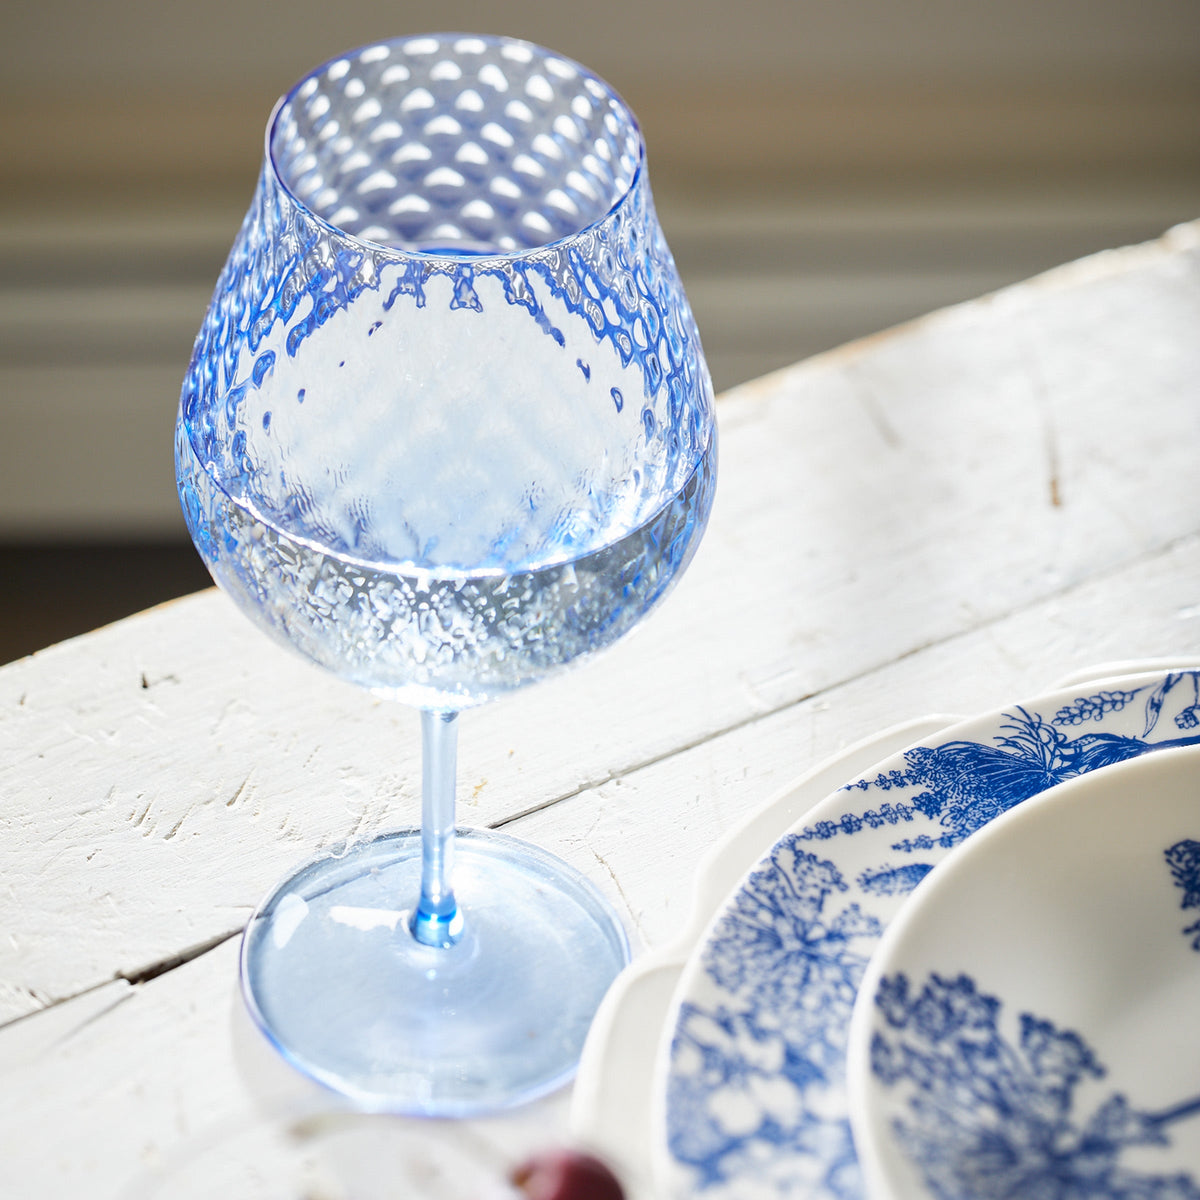 Phoebe cobalt blue mouth-blown optic crystal universal wine glasses set with summber blues platesfrom Caskata.